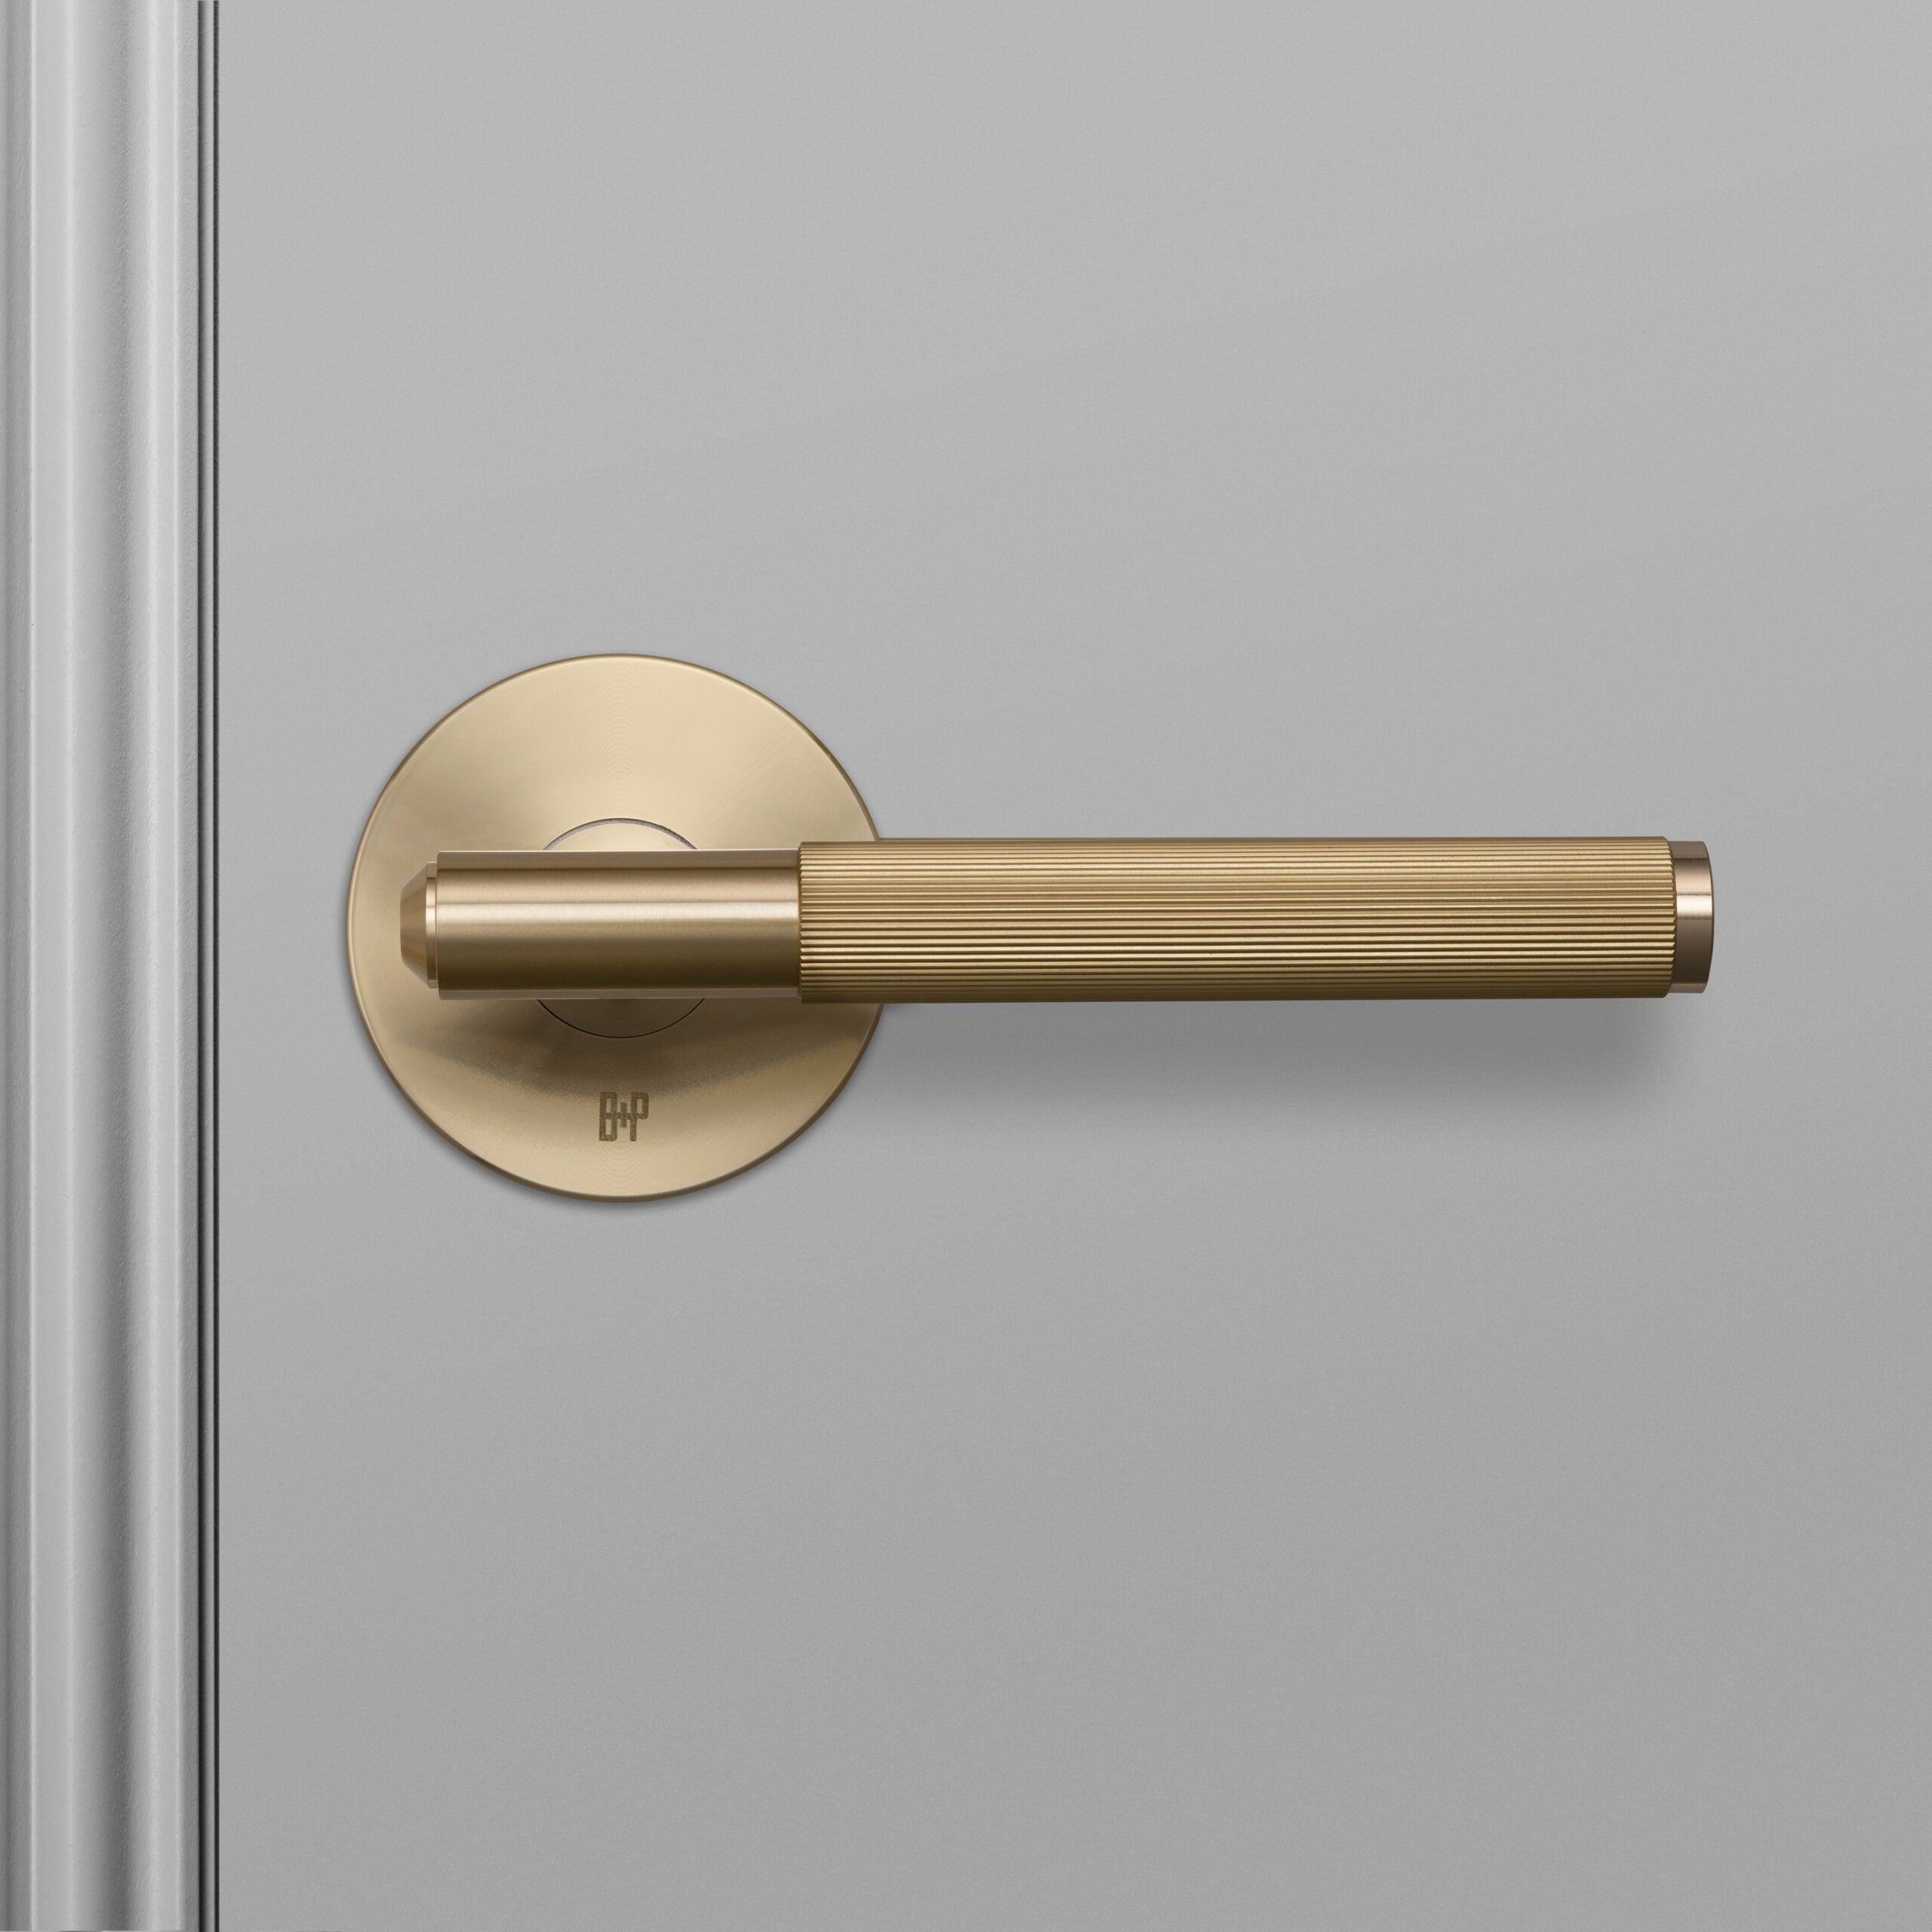 Buster + Punch Conventional Door Handle, Linear Design - PRIVACY TYPE Hardware Buster + Punch Brass  